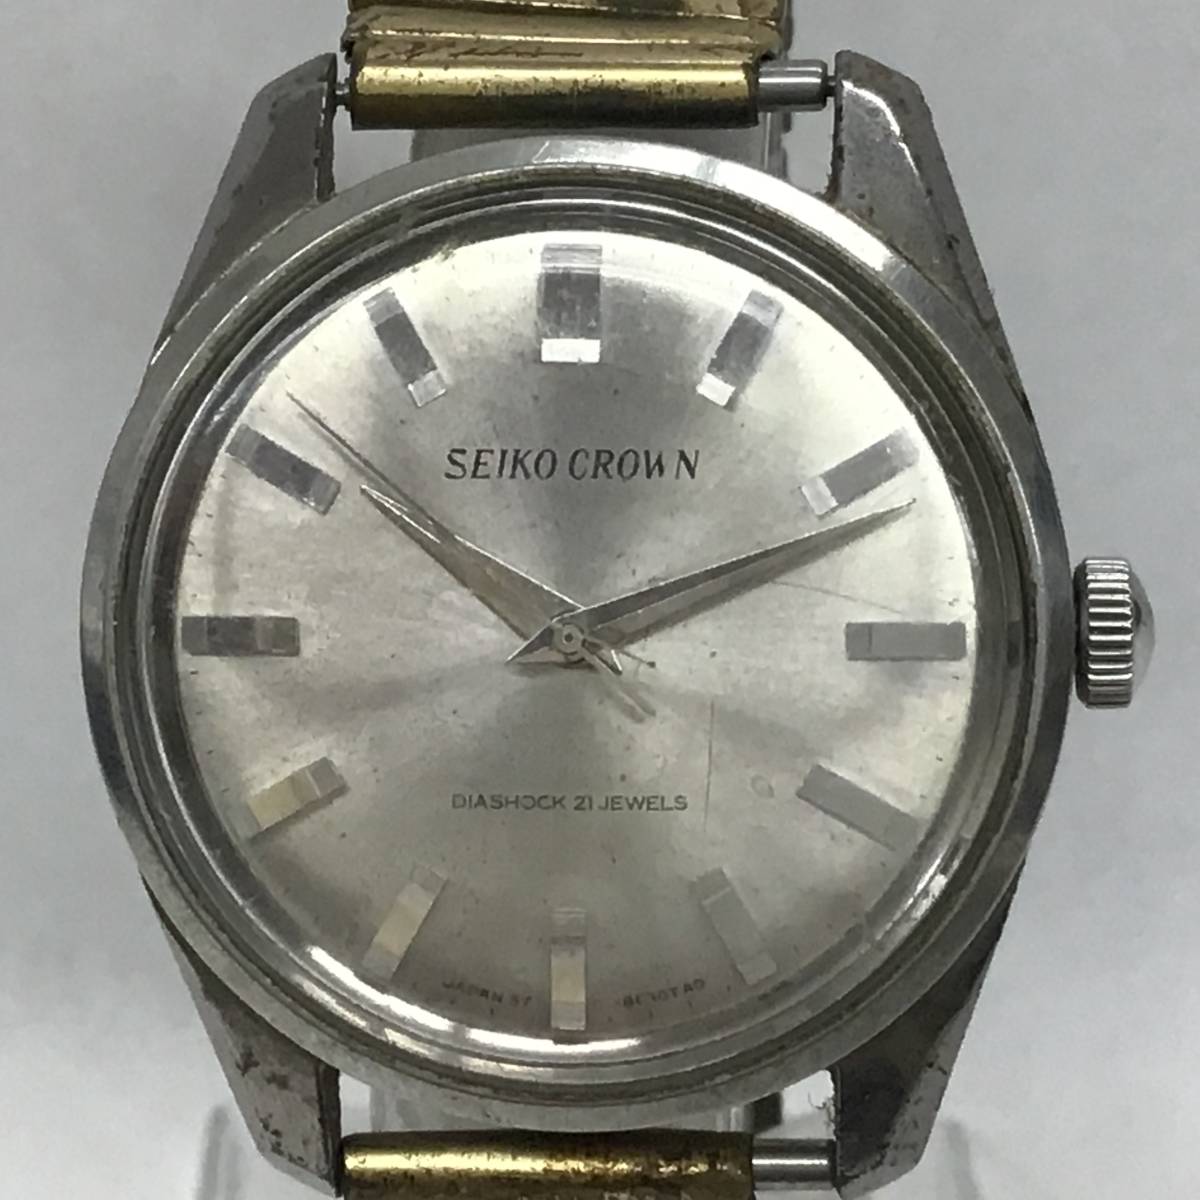 SEIKO セイコー クラウン 21石 57-8010 シルバー 文字盤 手巻き メンズ腕時計 現状品 product details |  Yahoo! Auctions Japan proxy bidding and shopping service | FROM JAPAN